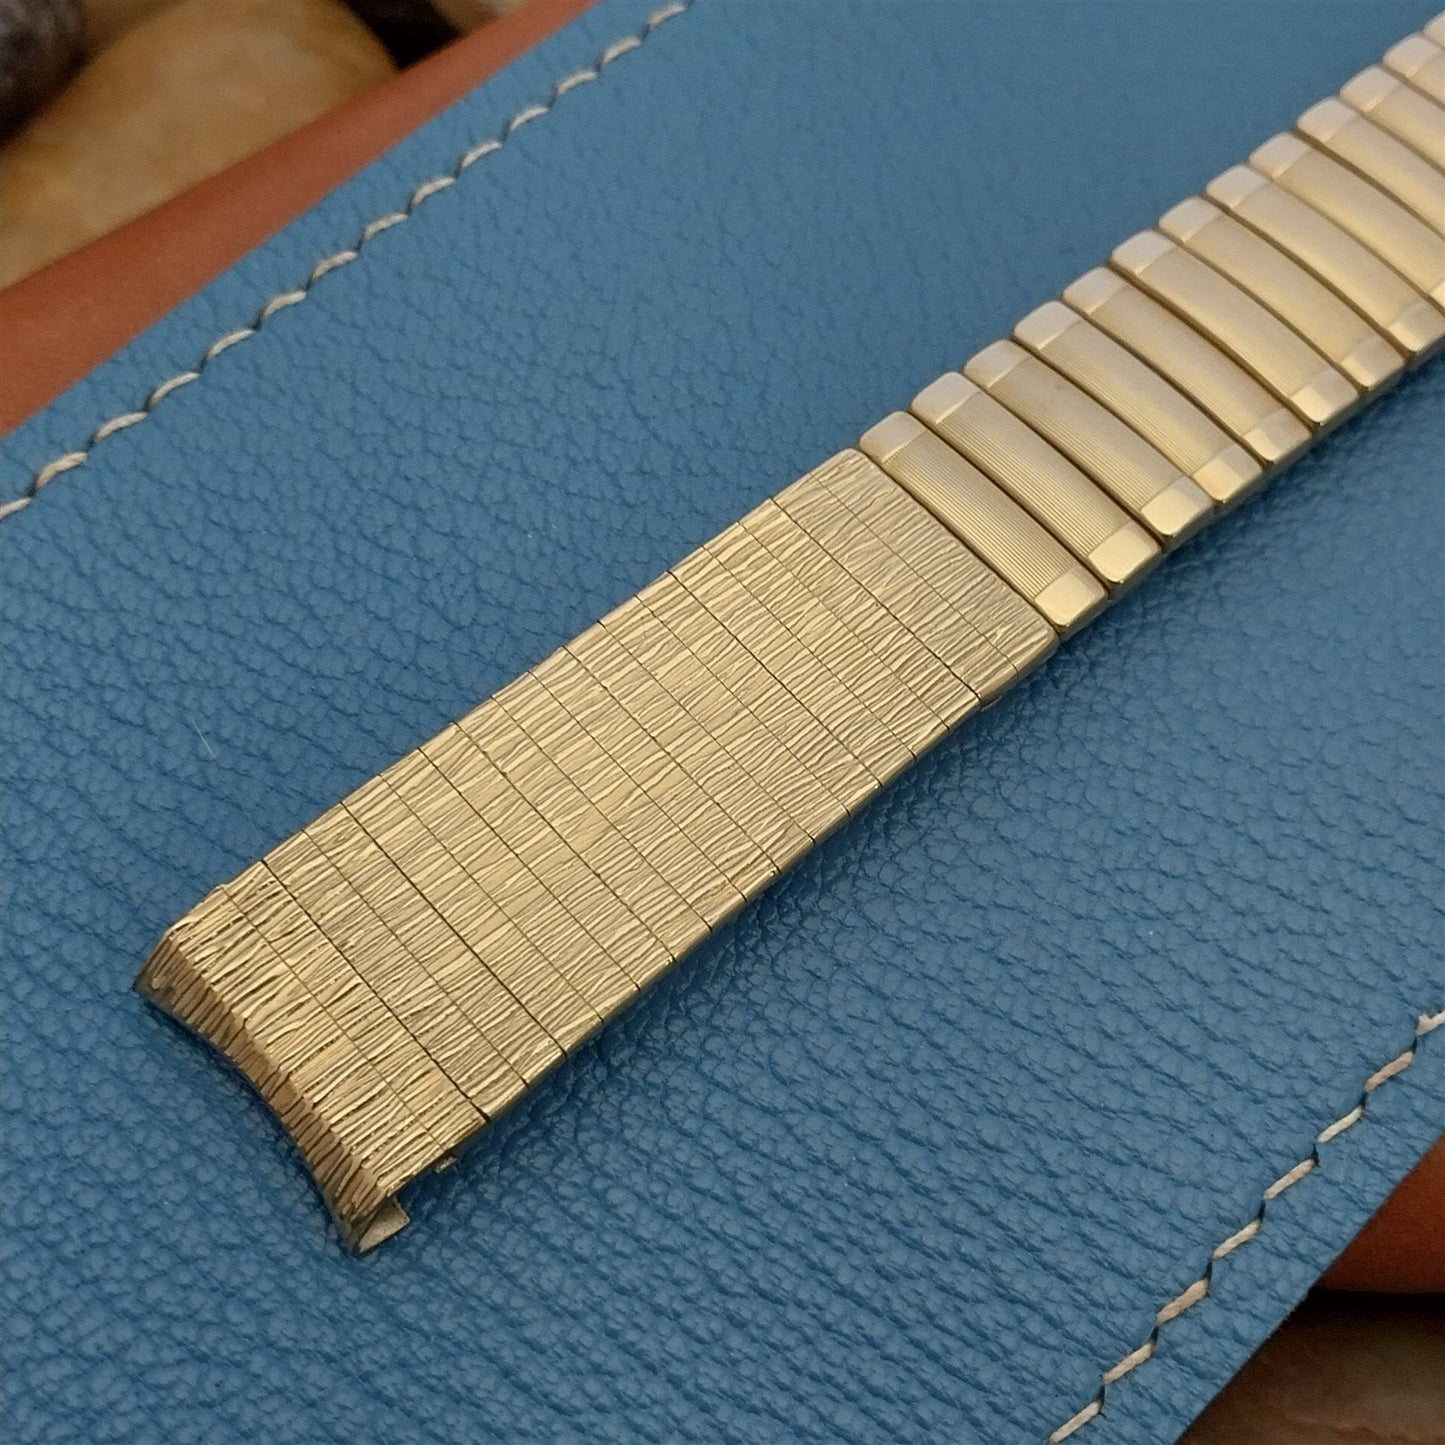 11/16" 17.2mm 10k Yellow Gold-Filled Classic Baldwin Unused Vintage Watch Band